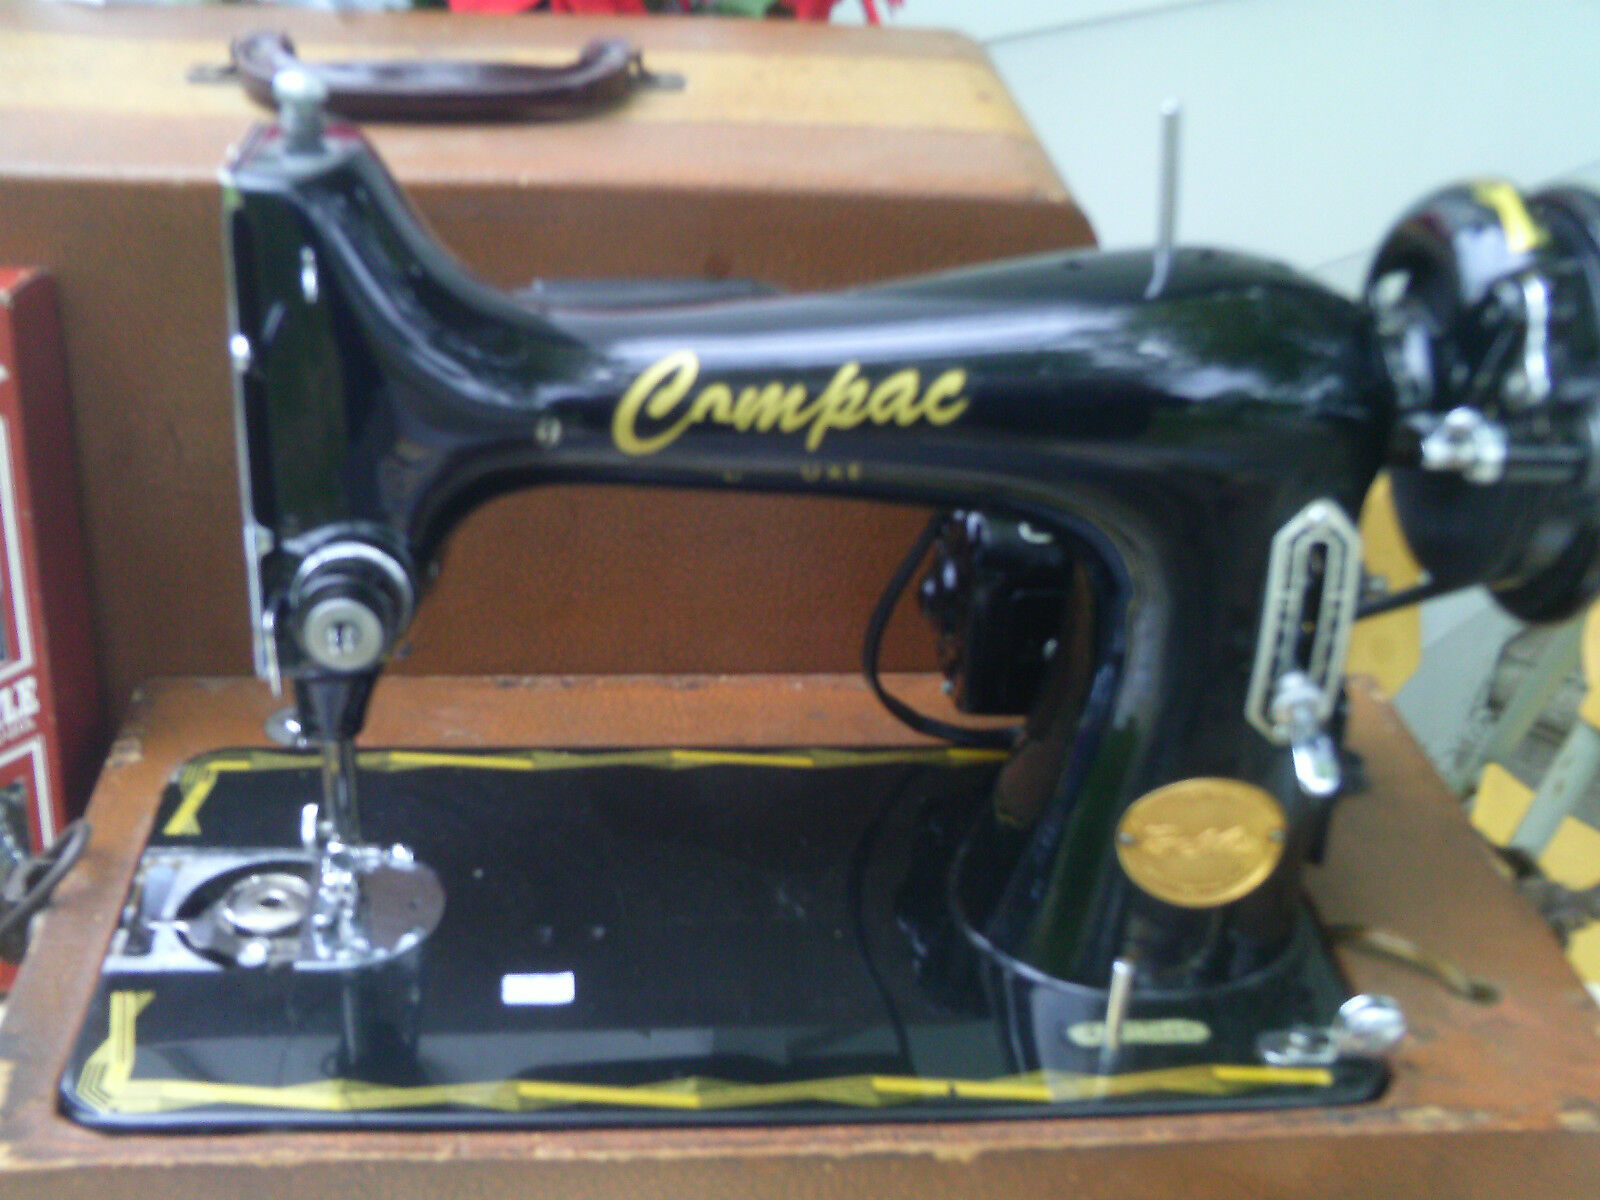 Occupied Japan Champion Empire Machine compac deluxe sewing machine 10171